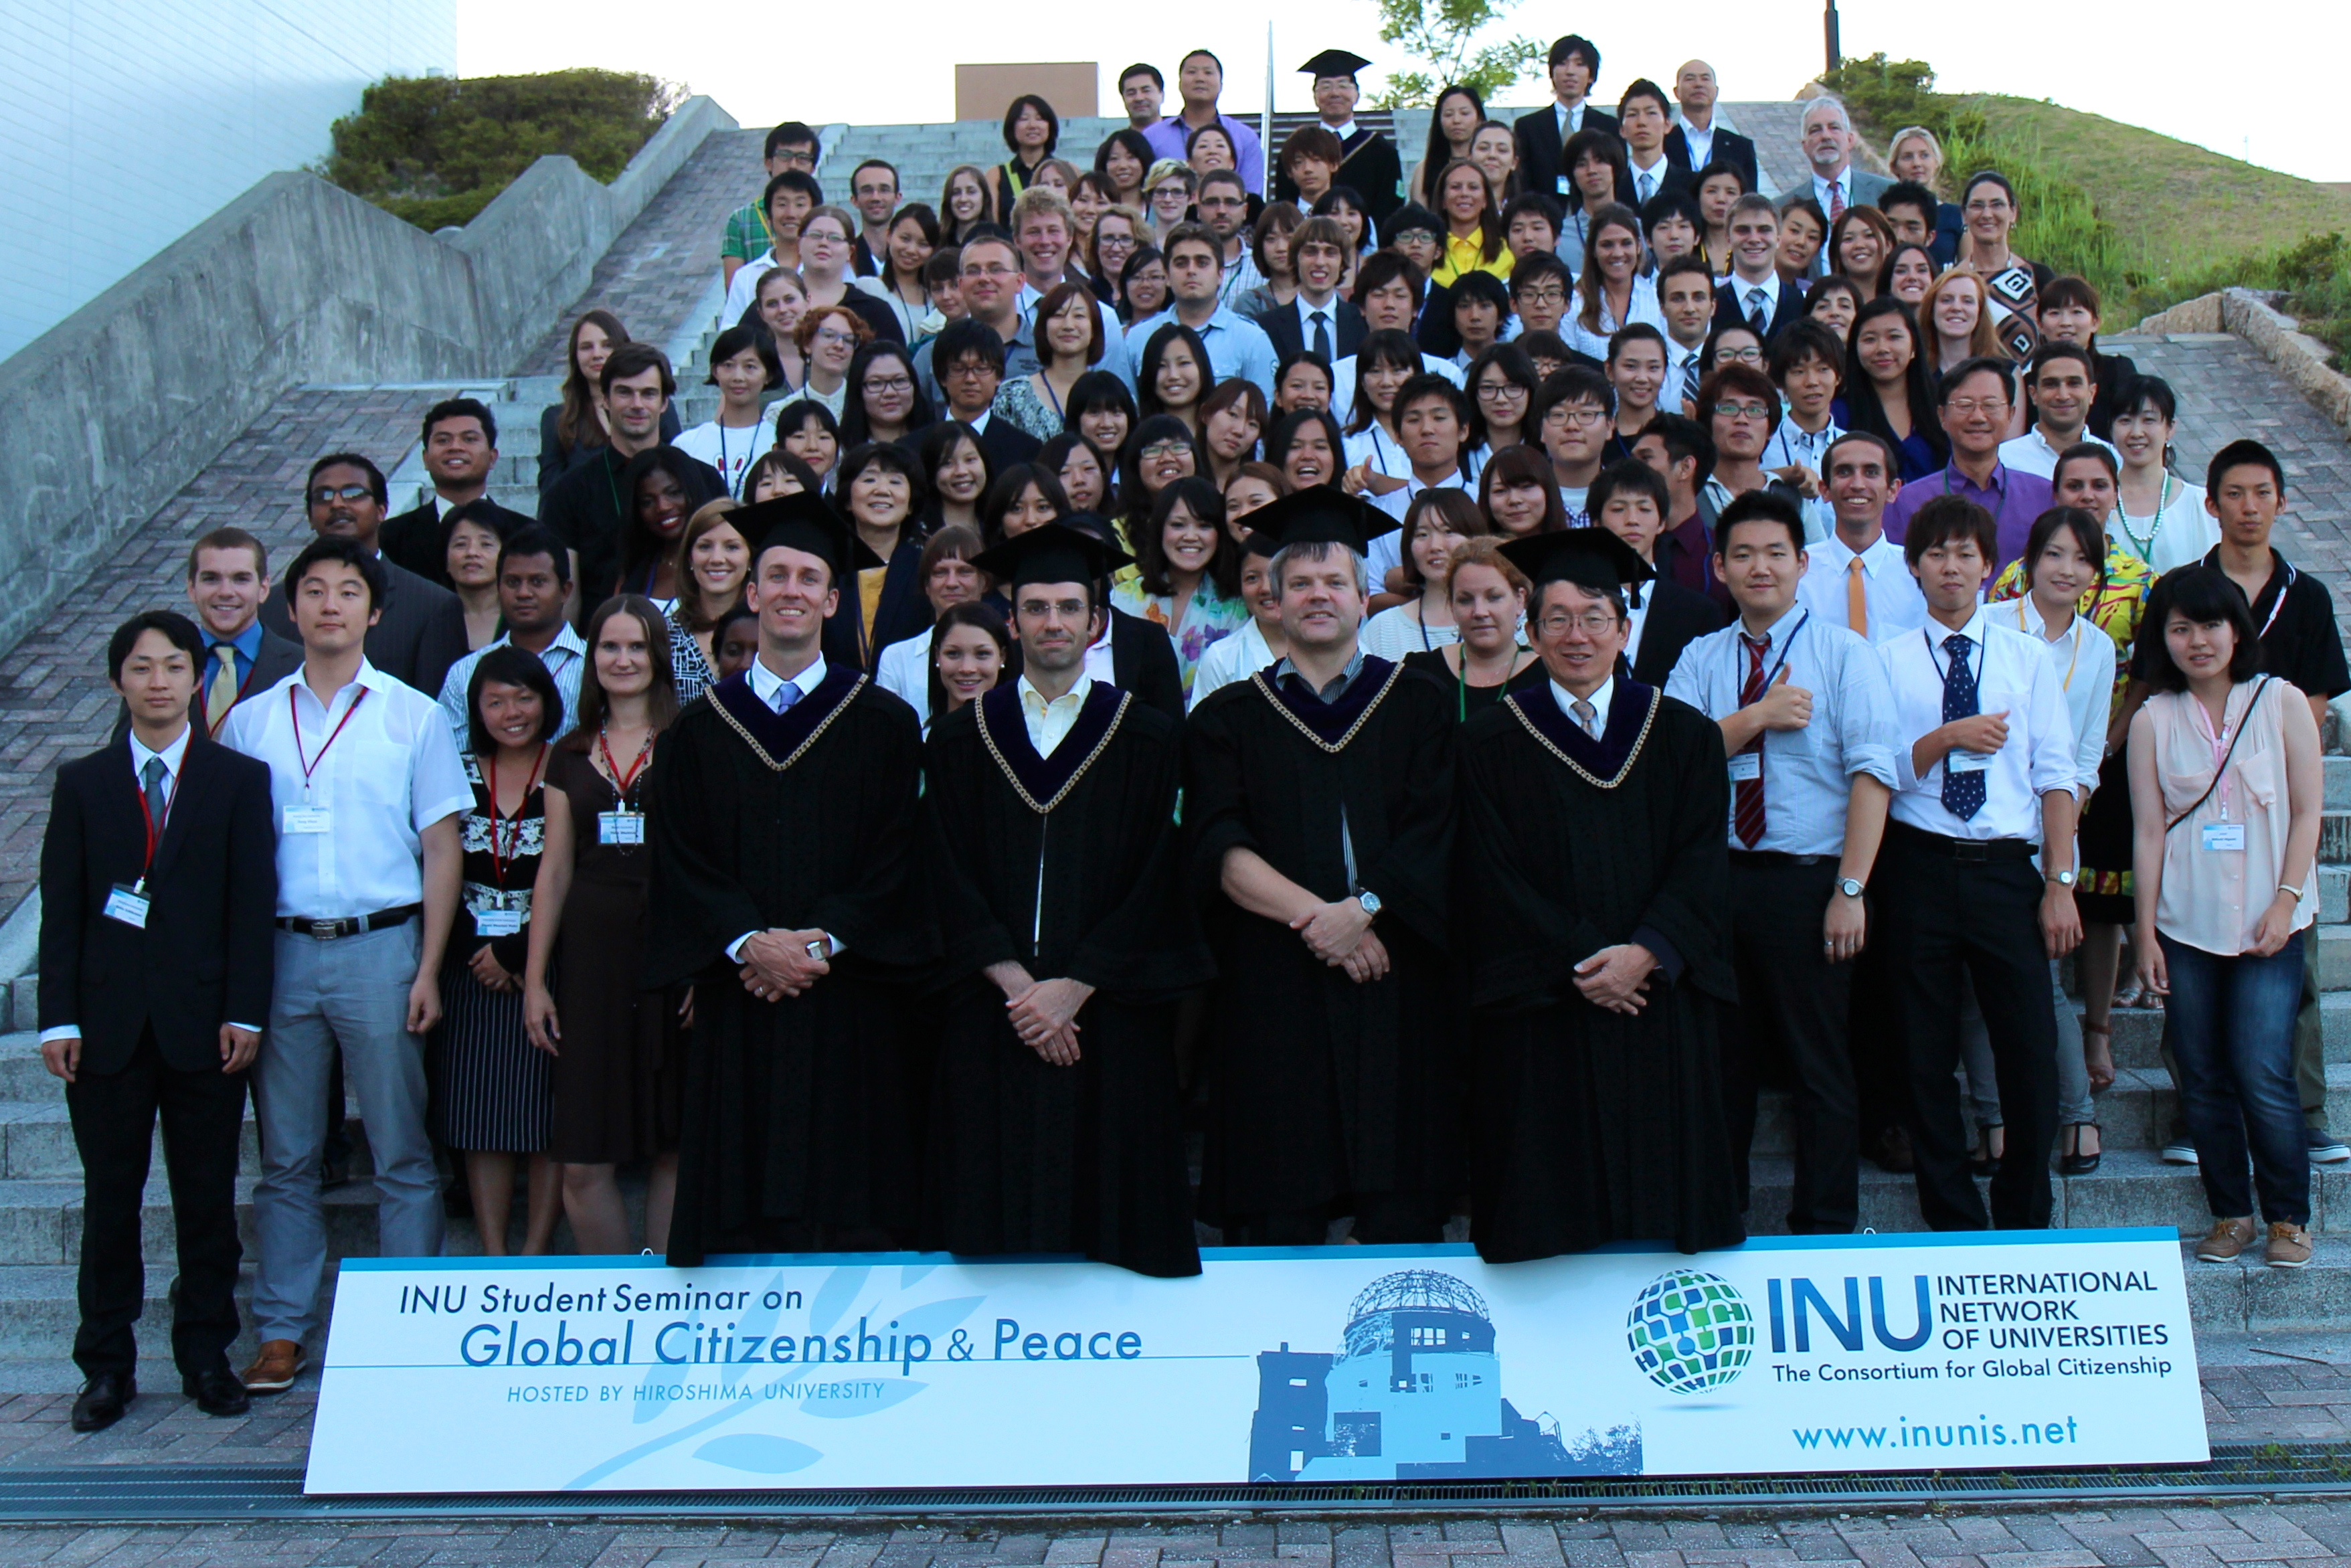 INU Student Seminar and Summer Master School 2012_After Certificate Ceremony Cropped